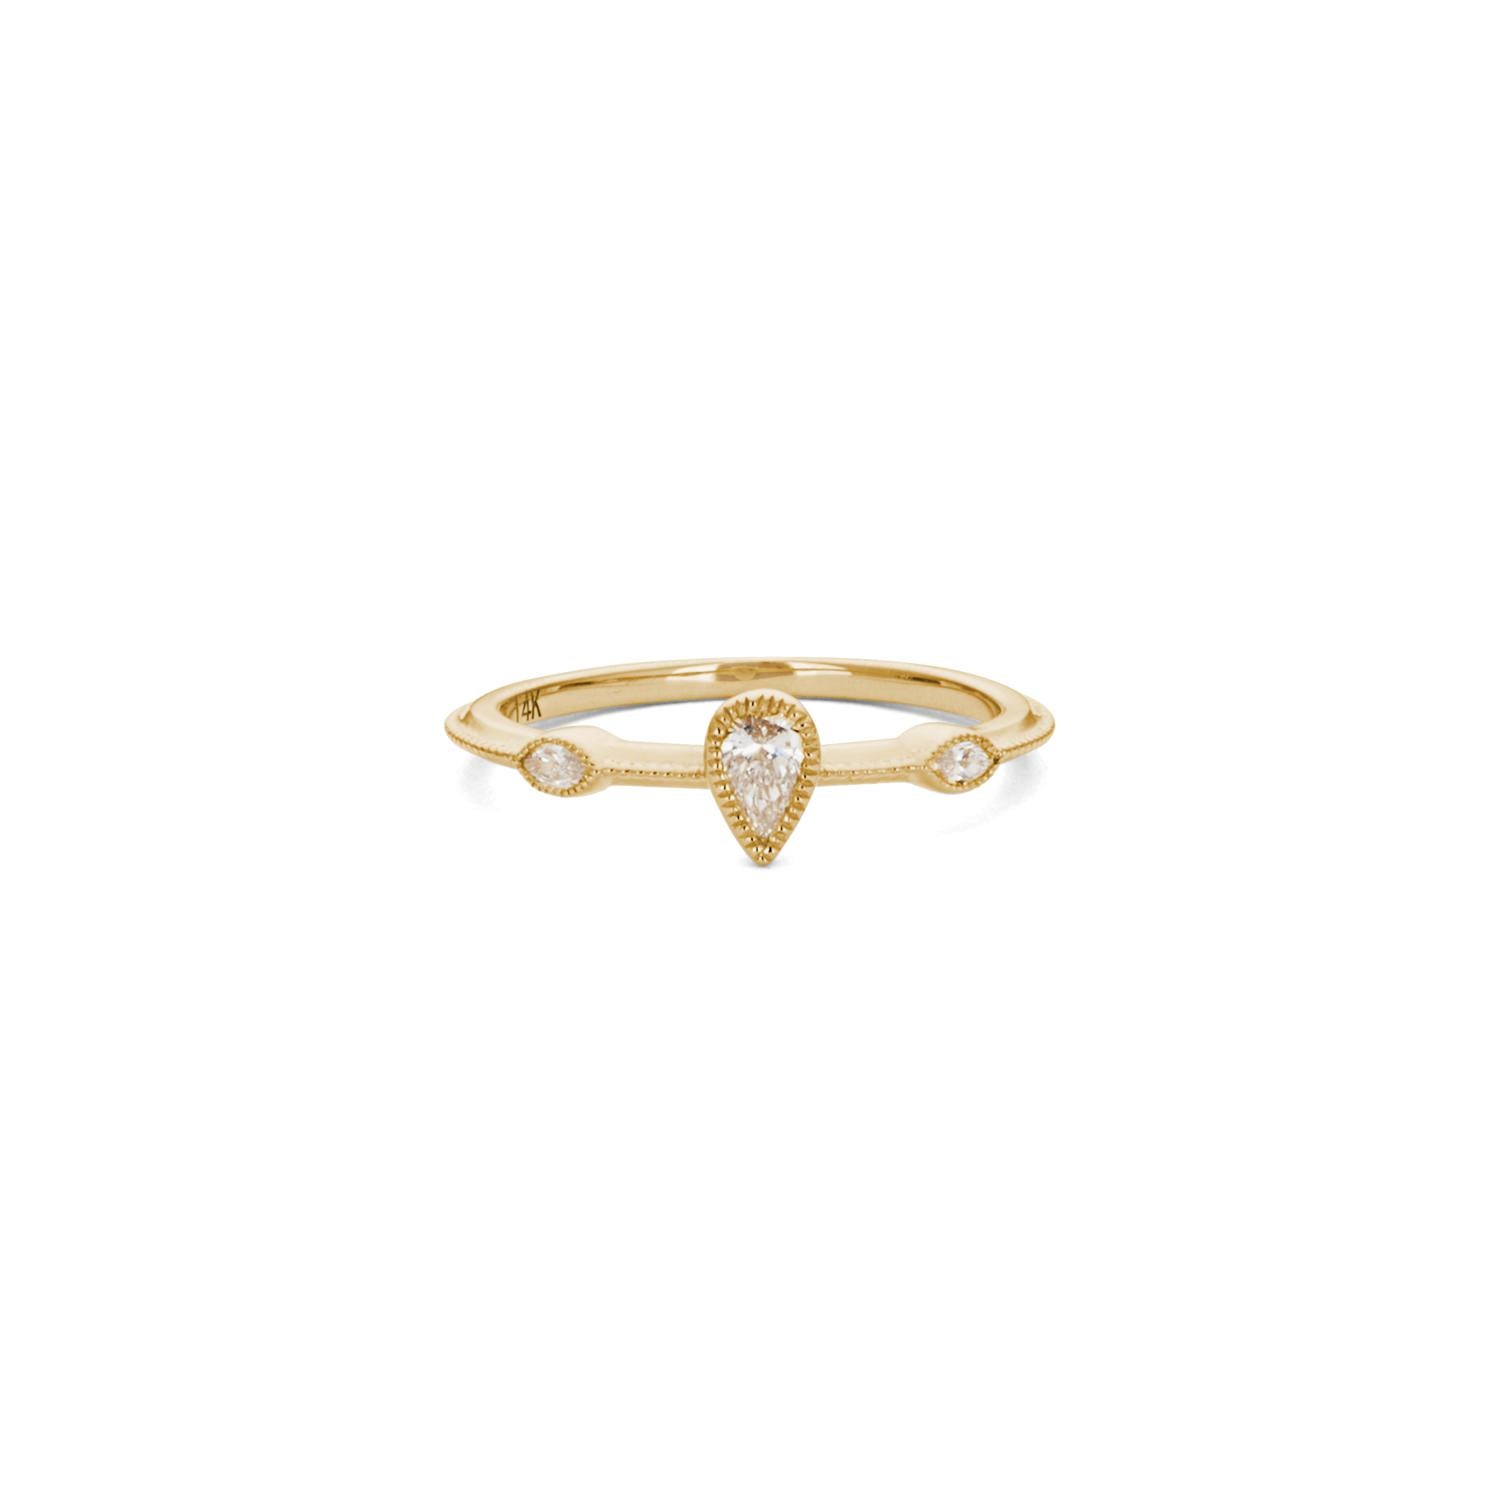 Five marquise diamonds create a peacock effect in 14K gold. They fit perfectly with the main band, featuring a pear-shaped white diamond flanked by two melee diamonds. This incredible set looks beautiful on any finger and makes an incredible wedding